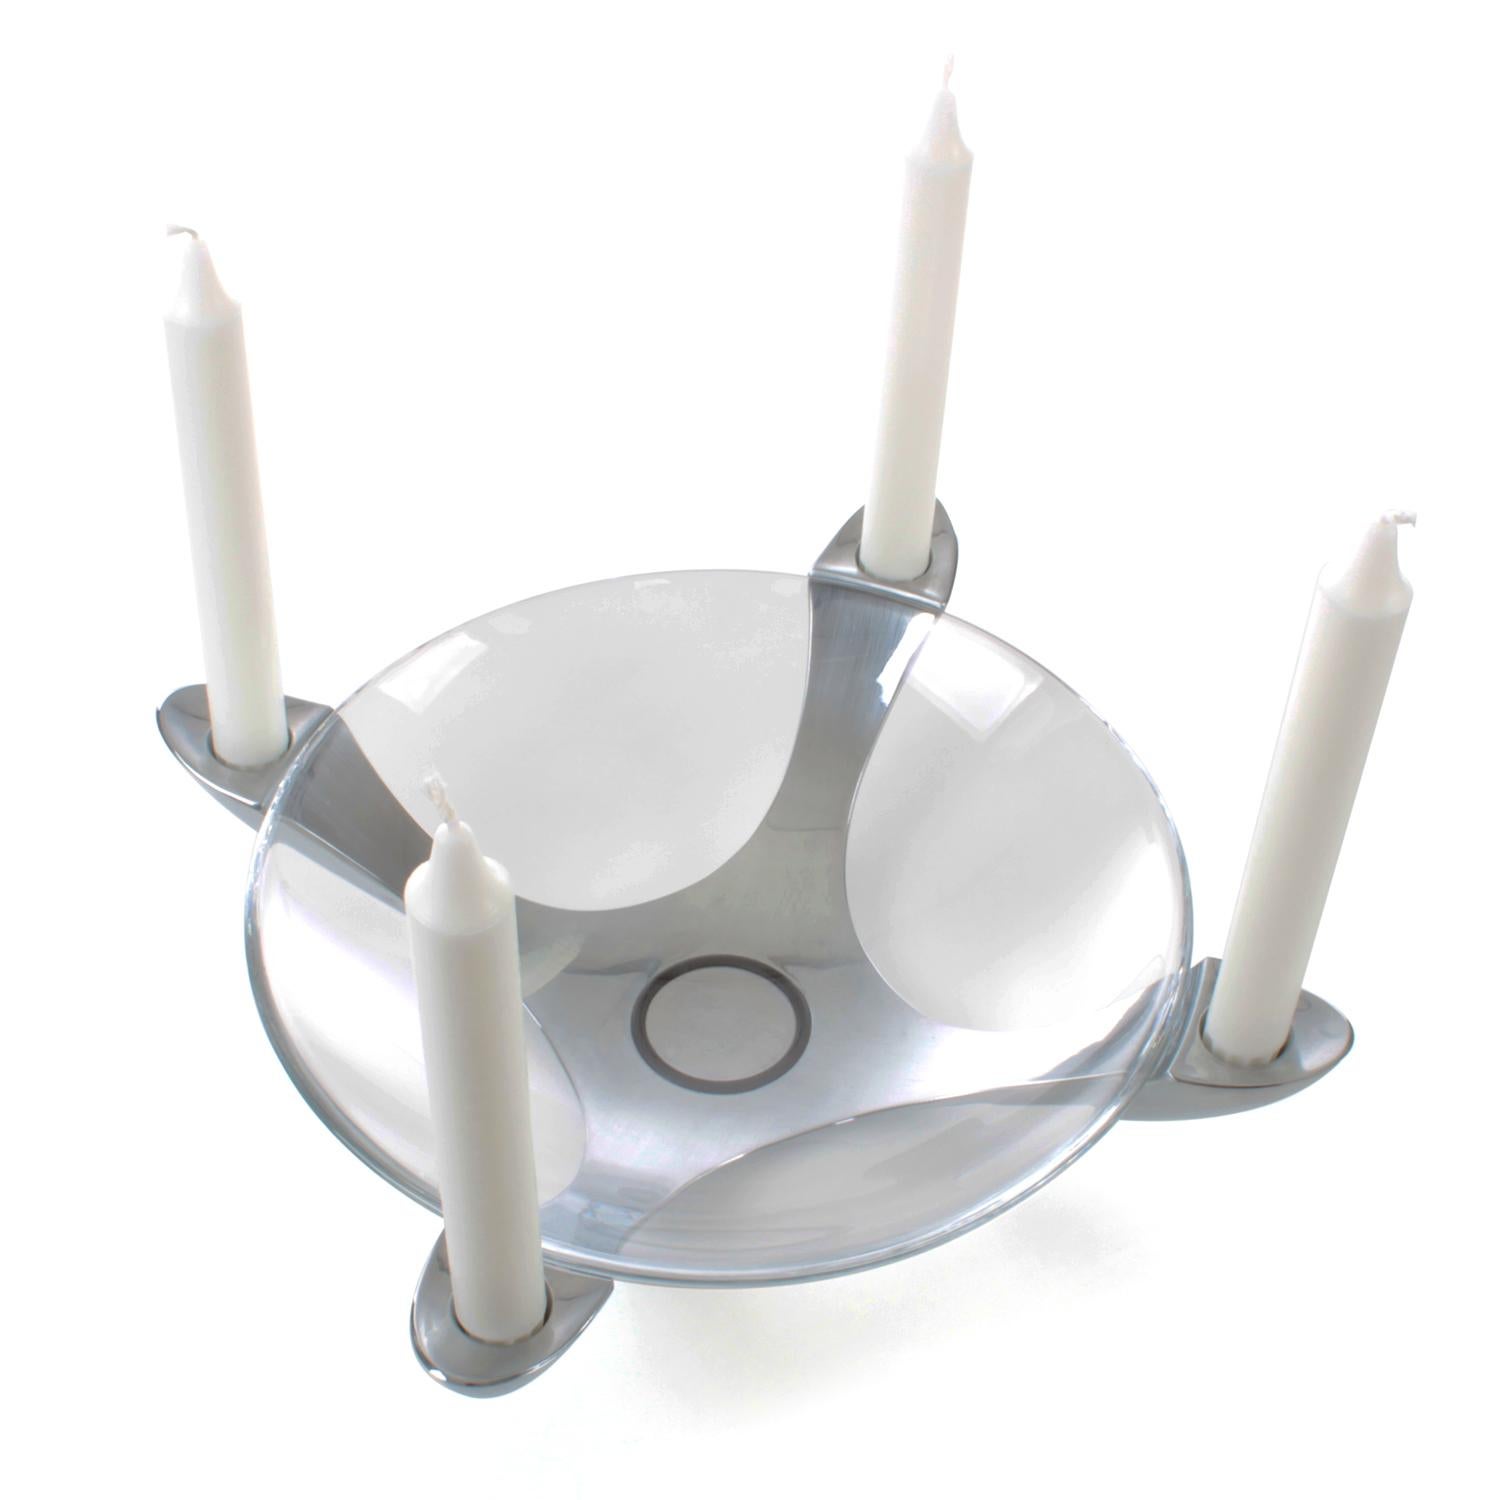 4-lights advent candleholder by Stelton - modern and very stylish stainless steel candleholder for four candles with glass bowl in the middle.

A stainless steel candleholder with a heavy center, from where four arms emerge, slightly curved